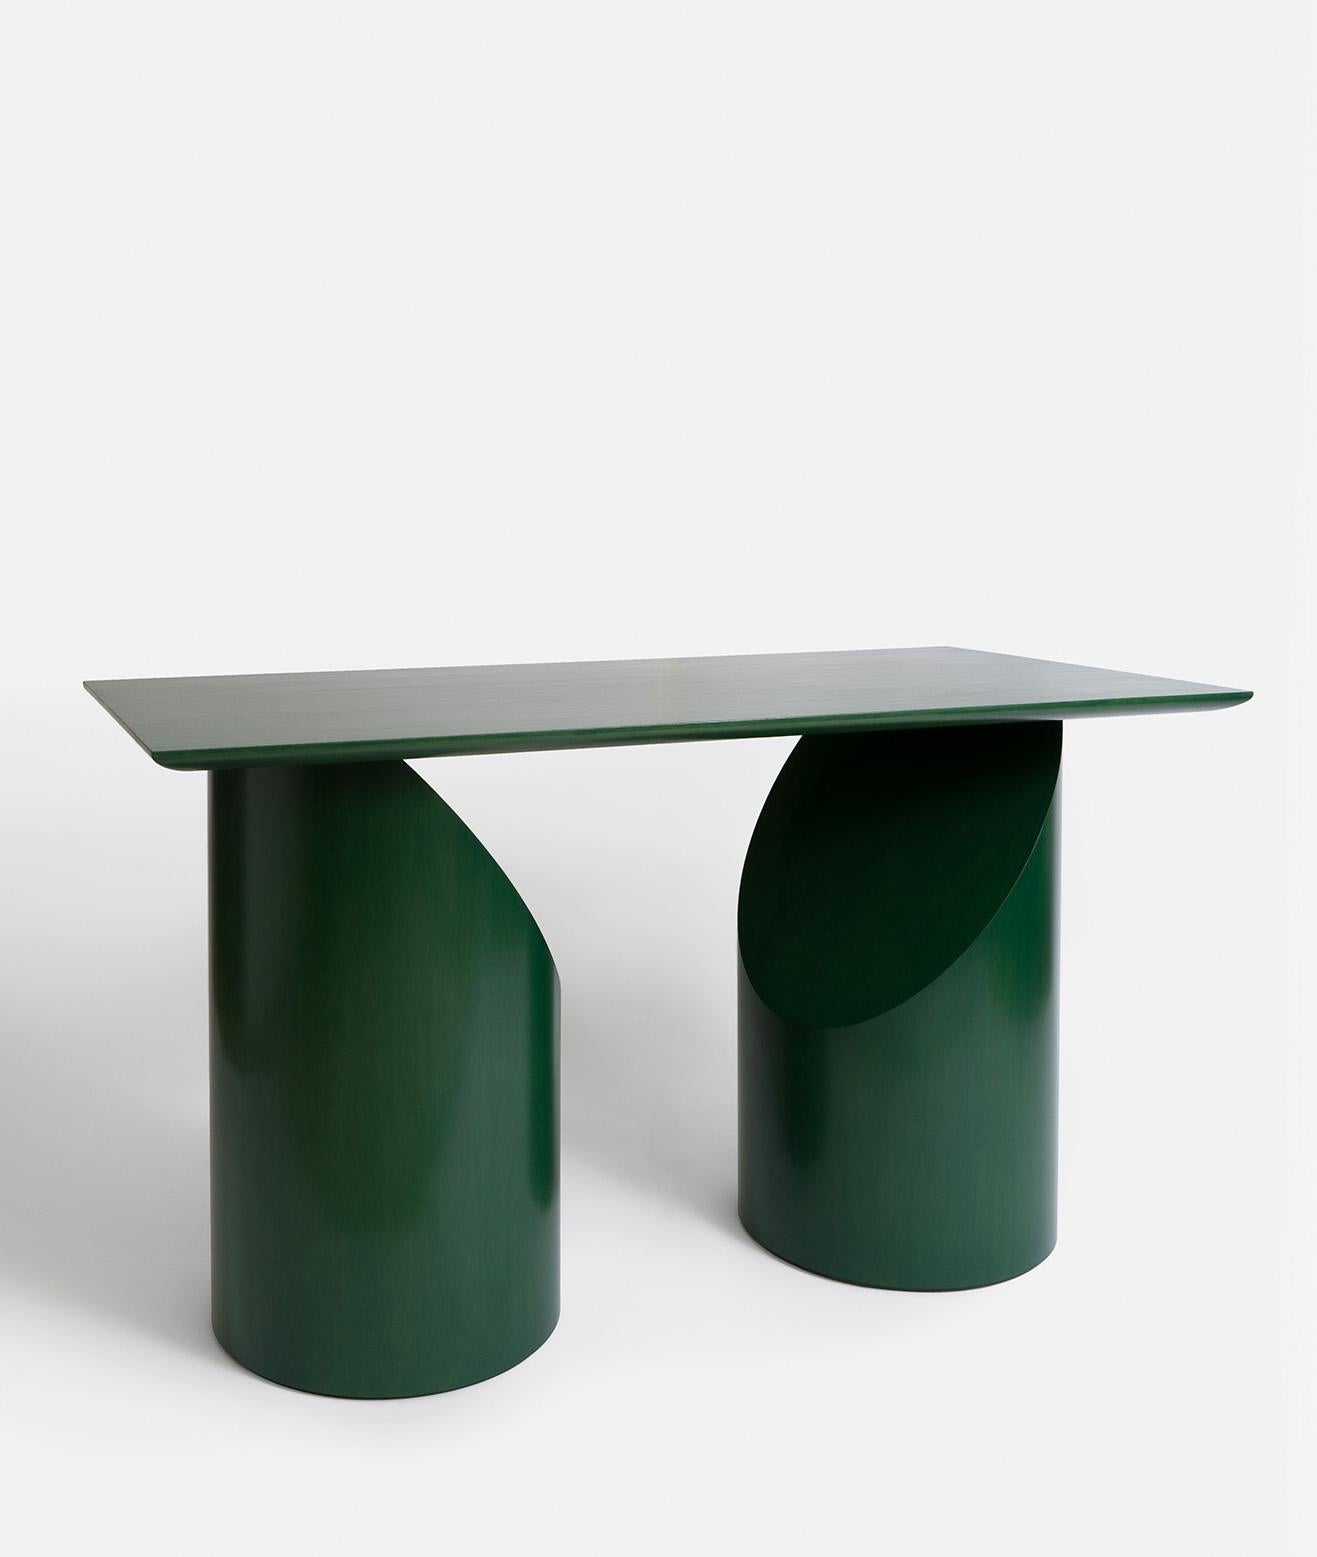 Taking inspiration from the conceptual forms of Hiroshi Sugimoto, the Segment desk by Brooklyn designer David Vu starts with the exploration of simple geometric volumes. With the use of minimal gestures of cuts and rotations the aim is to create a